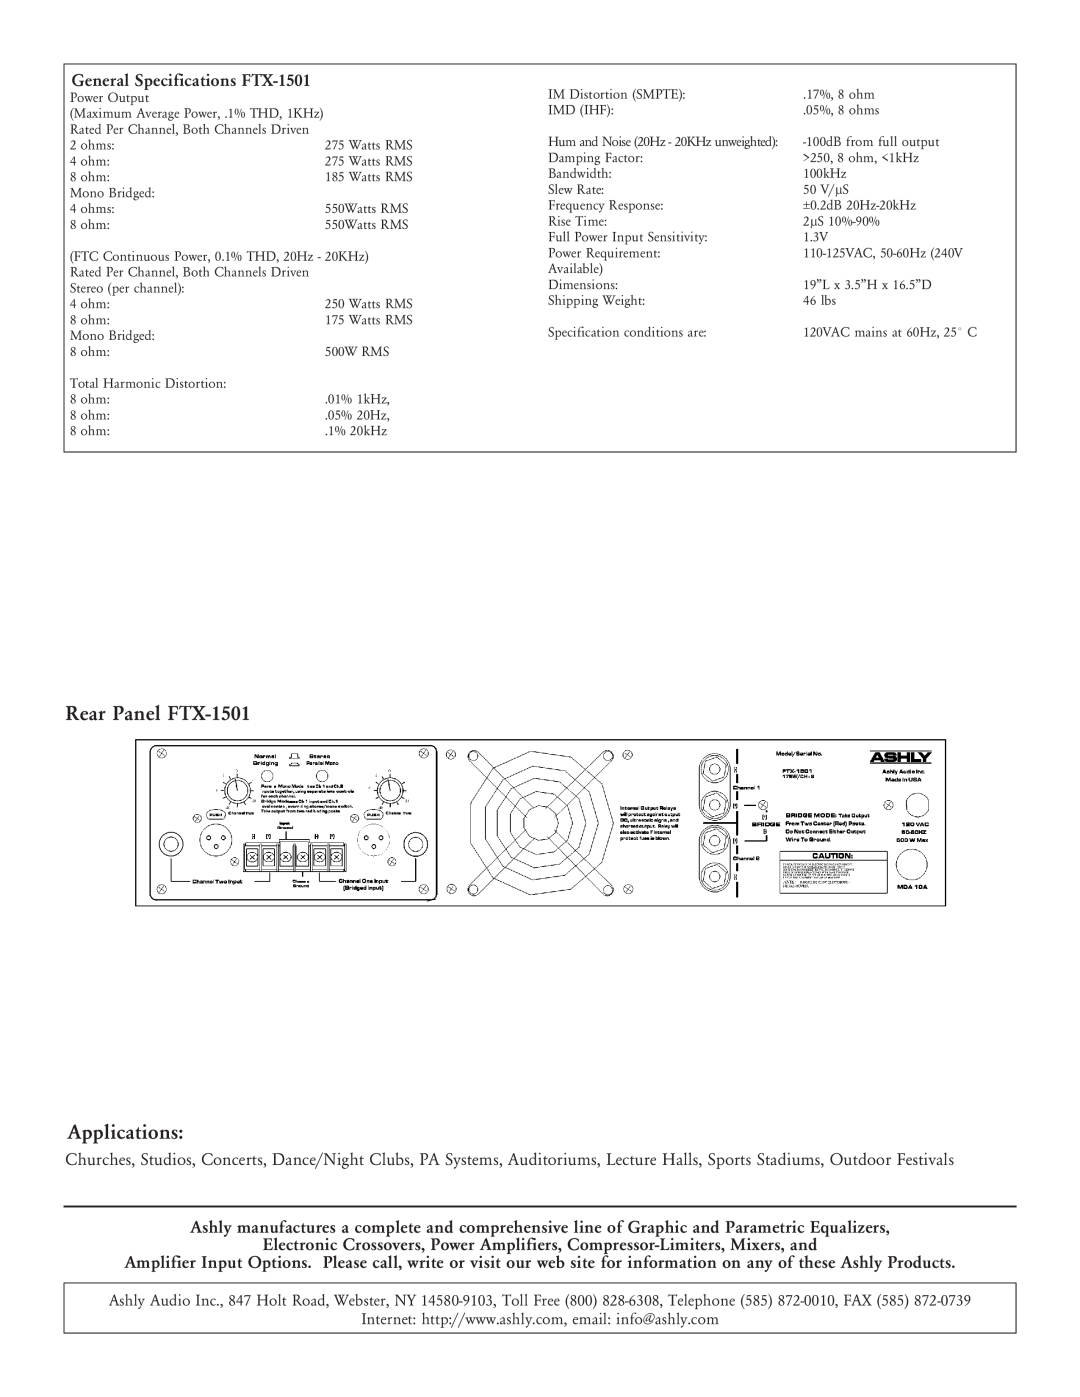 Ashly specifications Rear Panel FTX-1501 Applications 